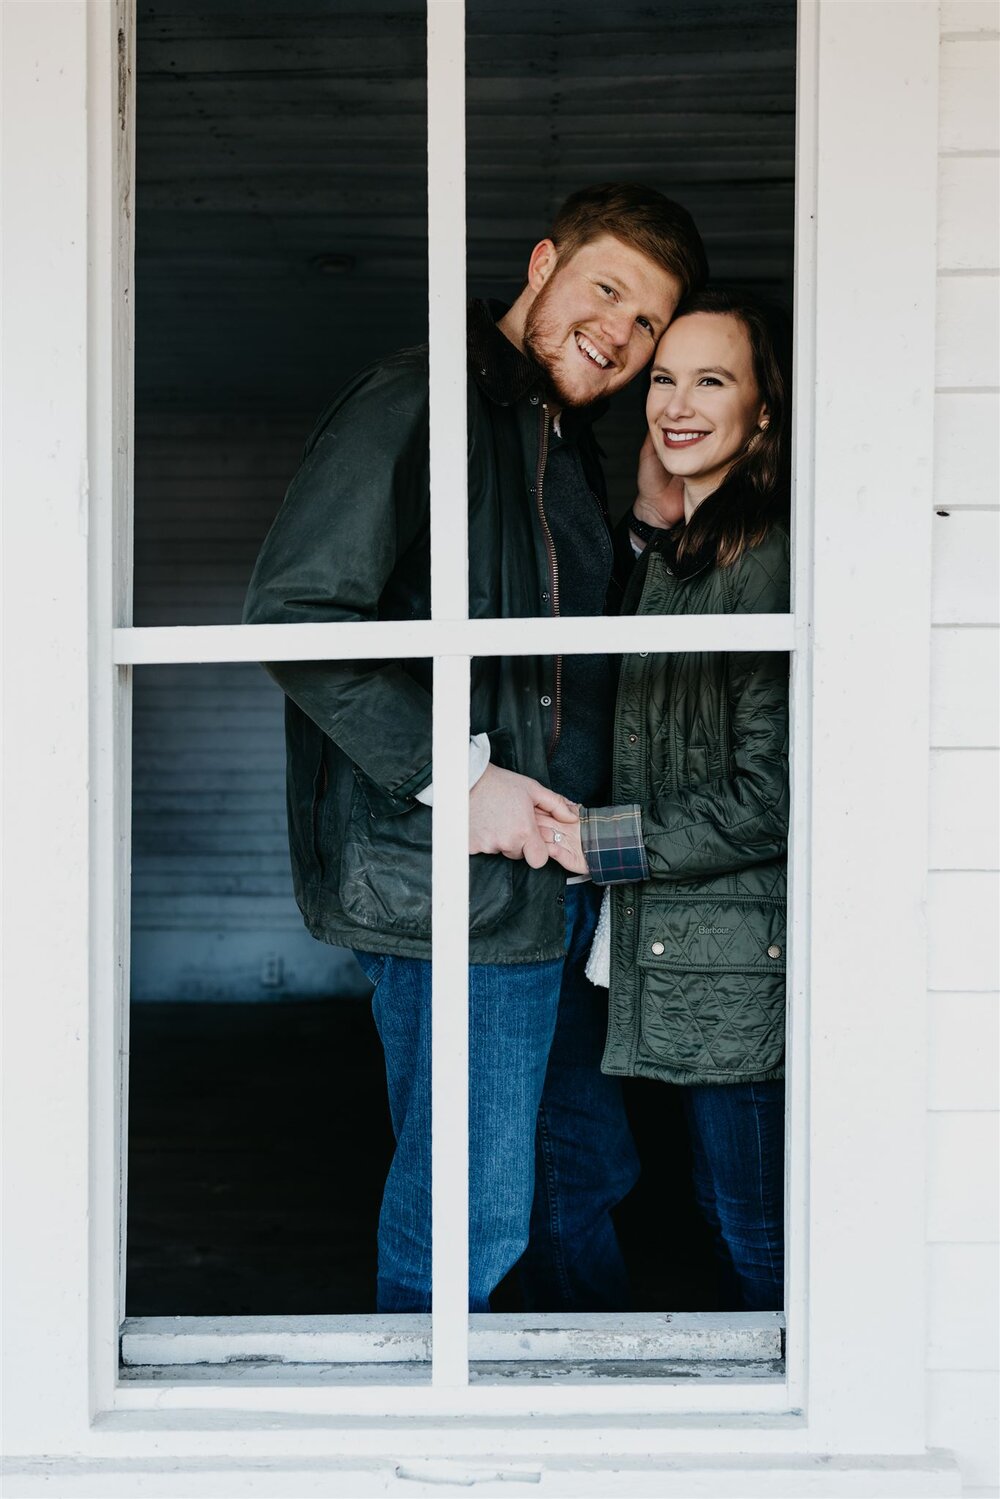 Winter Morning Engagement Photos captured by Knoxville Engagement Photographer